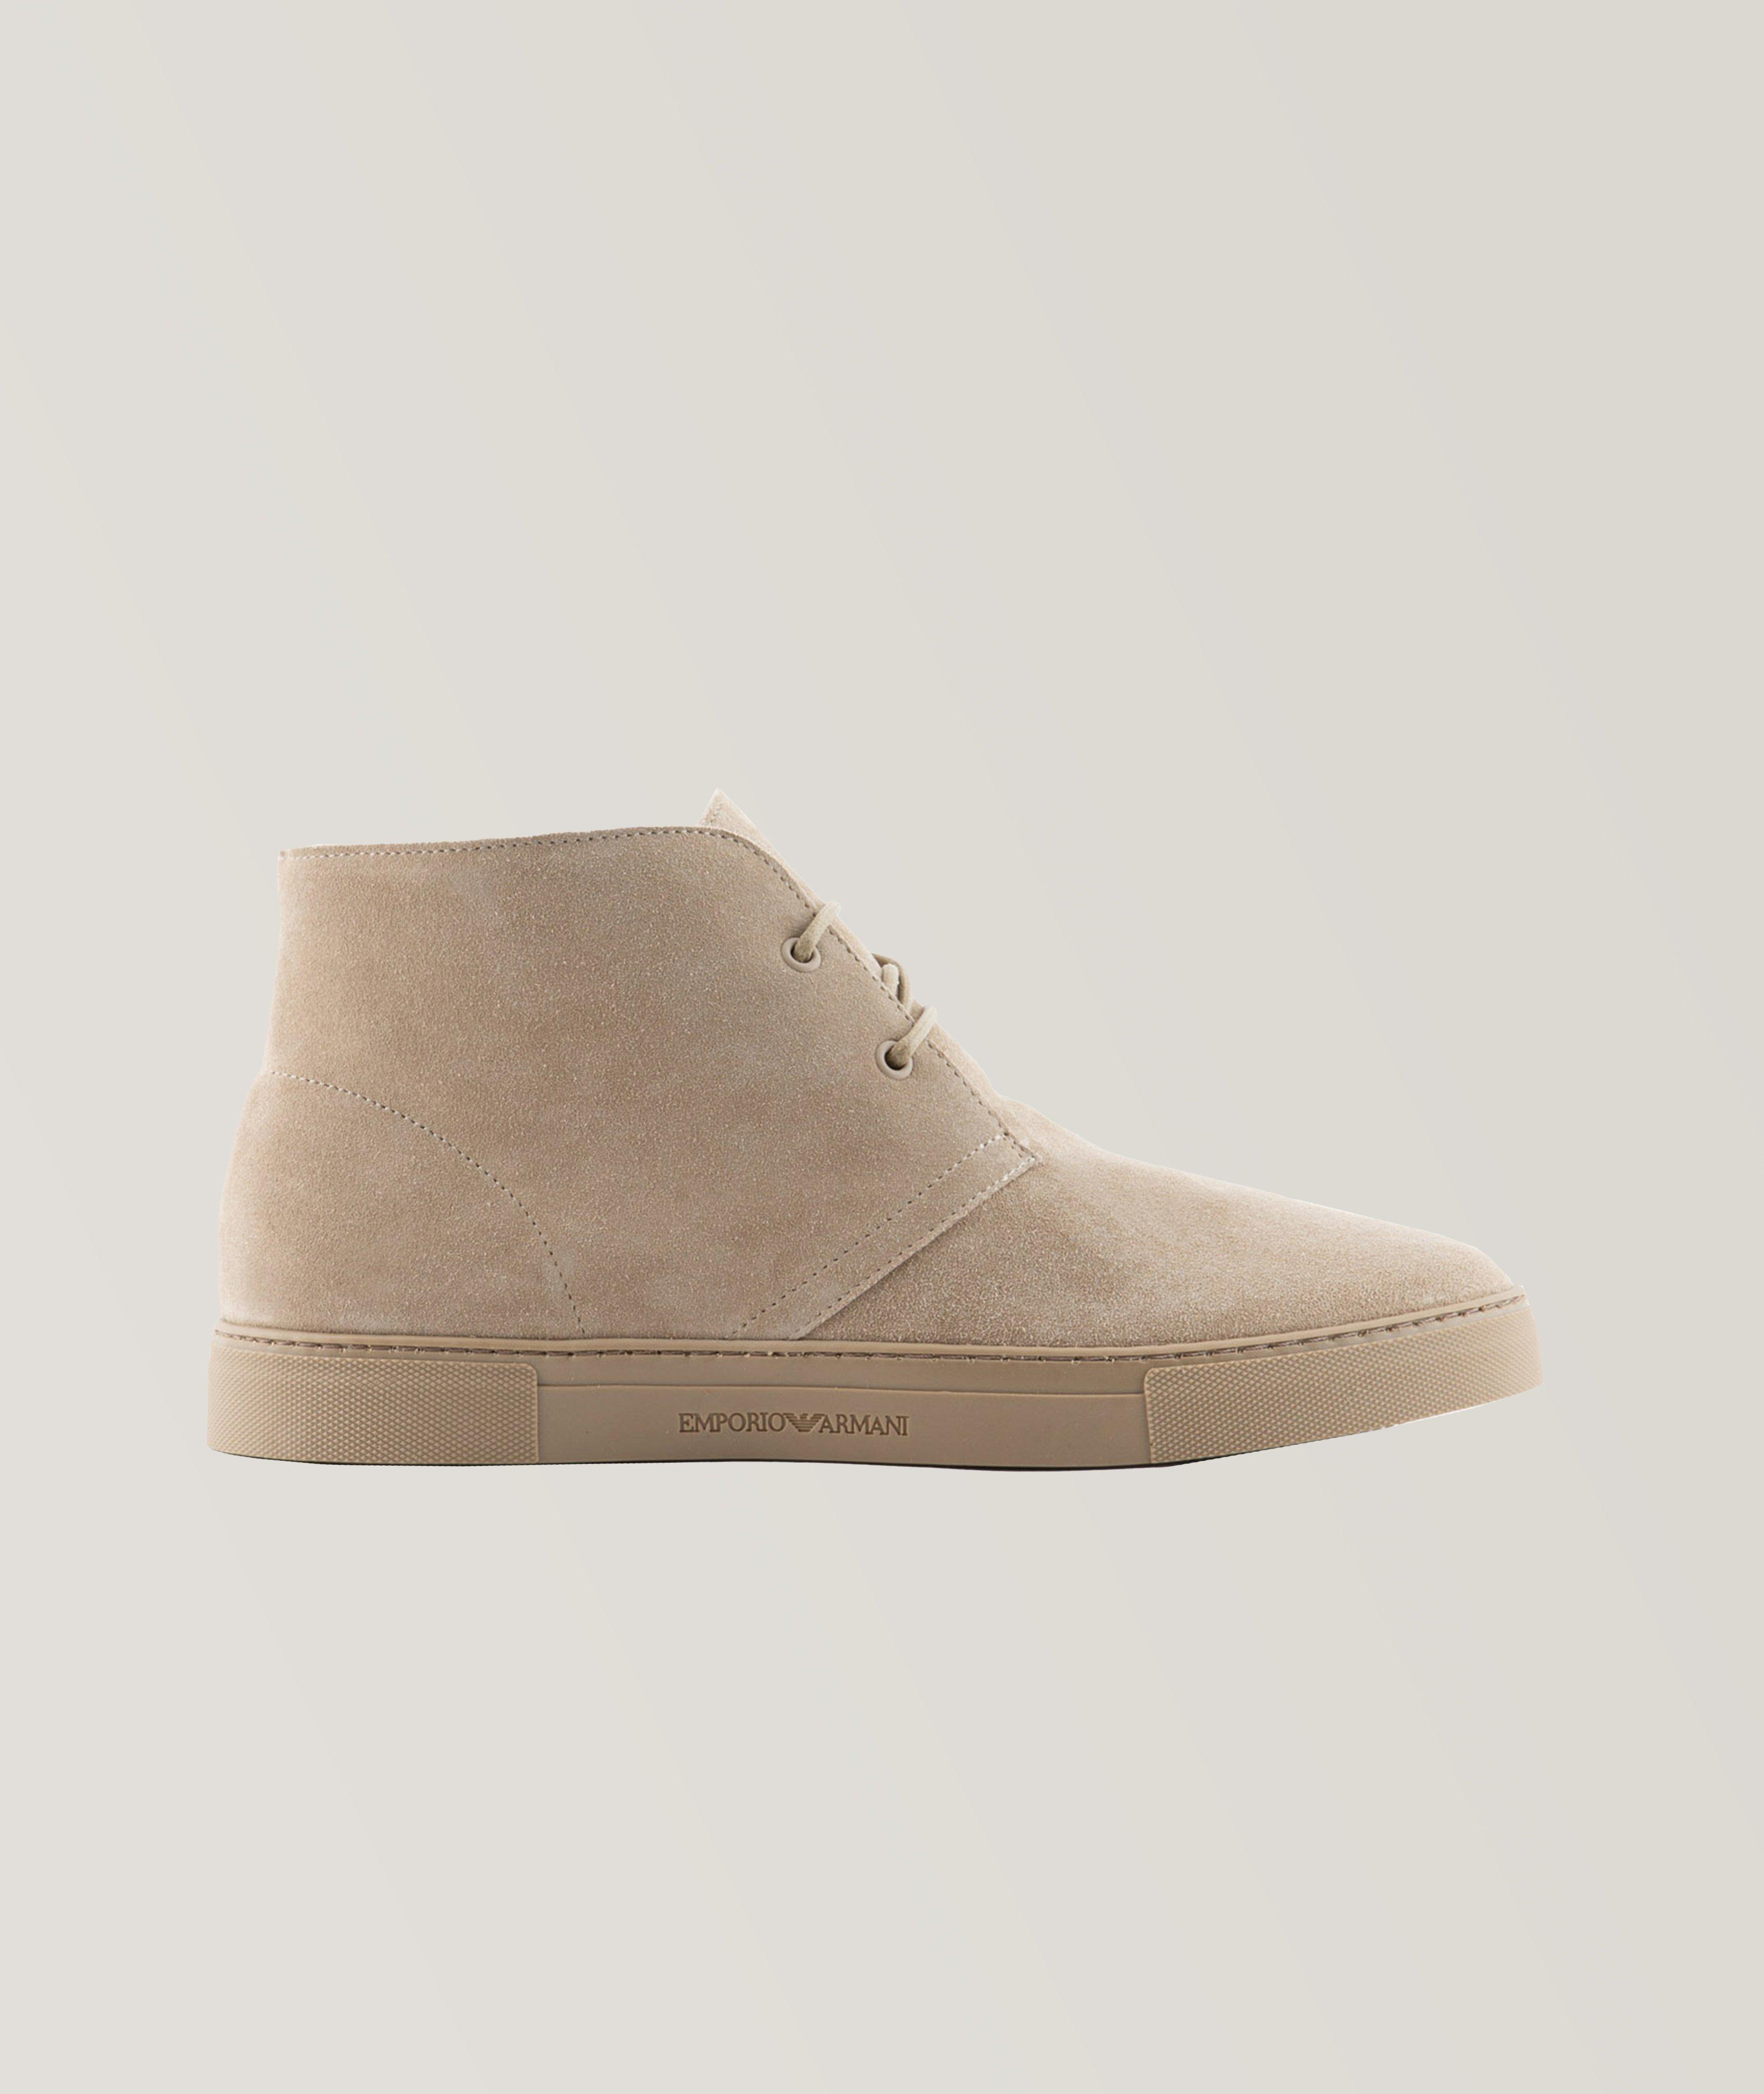 Emporio Armani Suede Lace-Up Desert Boots